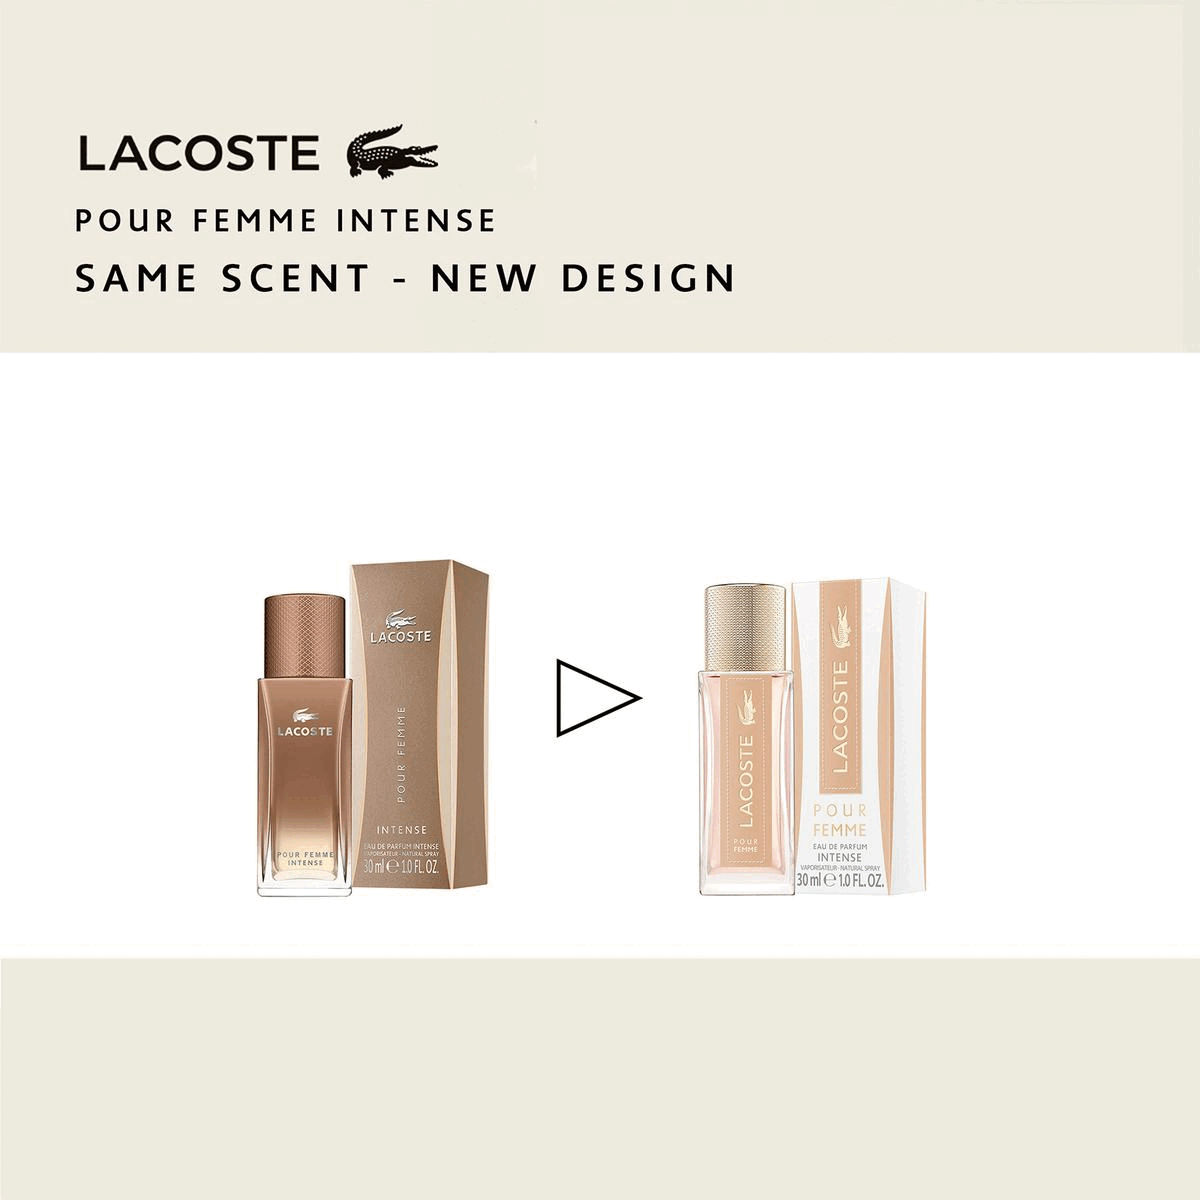 Two images transiting into each other in an endless loop. Image 1: Showing an image of the old bottle vs the new. Text: Lacoste pour femme intense same scent new design. Image 2: Lacoste pour femme au de parfum ingredients freesia, ceedar, jasmine. Lacoste pour femme au de parfum intense ingredients vanilla, cedar, lily of the valley.  